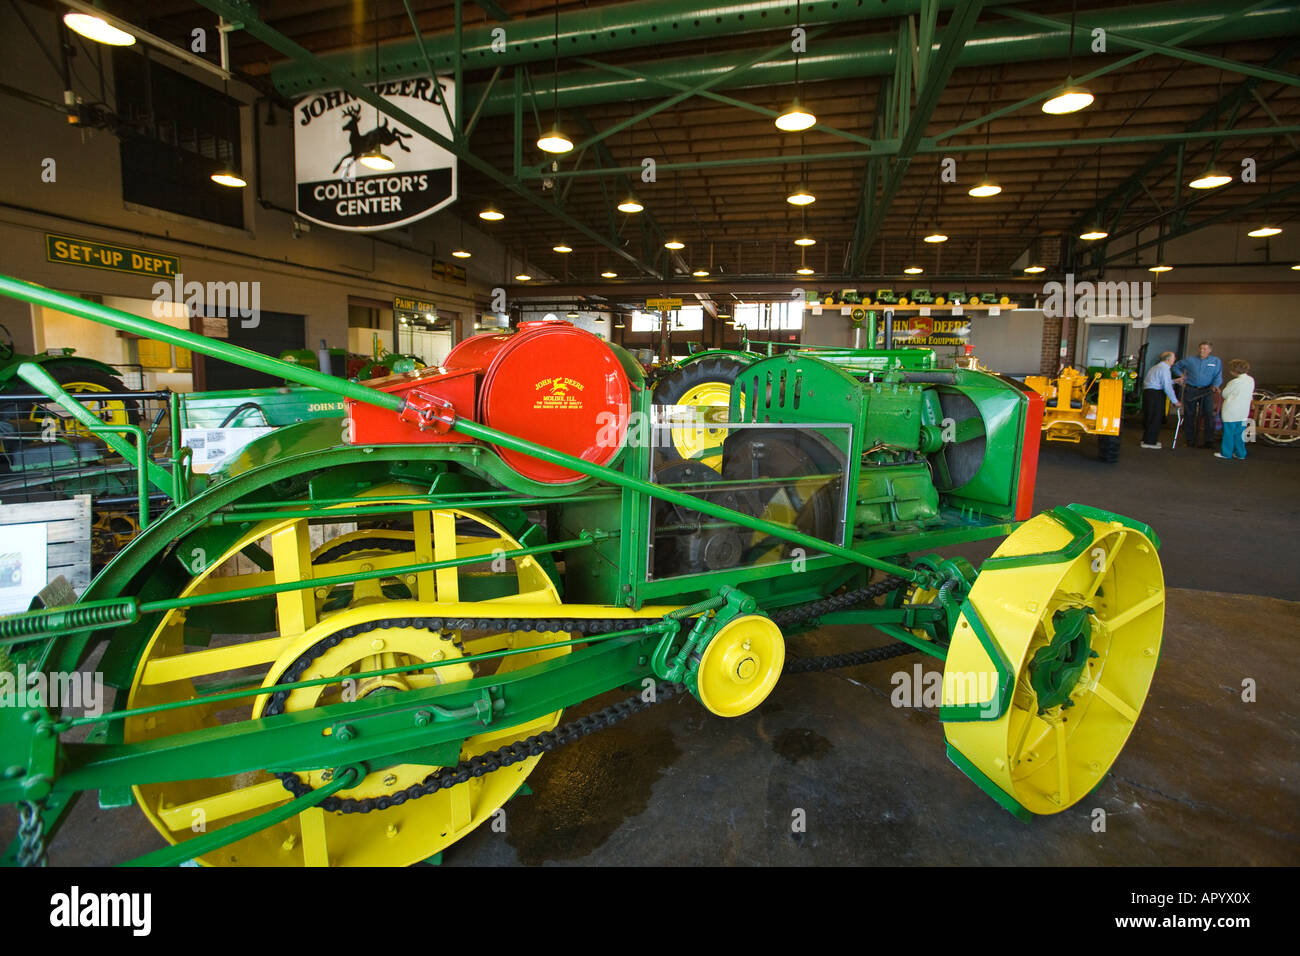 ILLINOIS Moline Restored tractor displayed in John Deere Collections Center Stock Photo